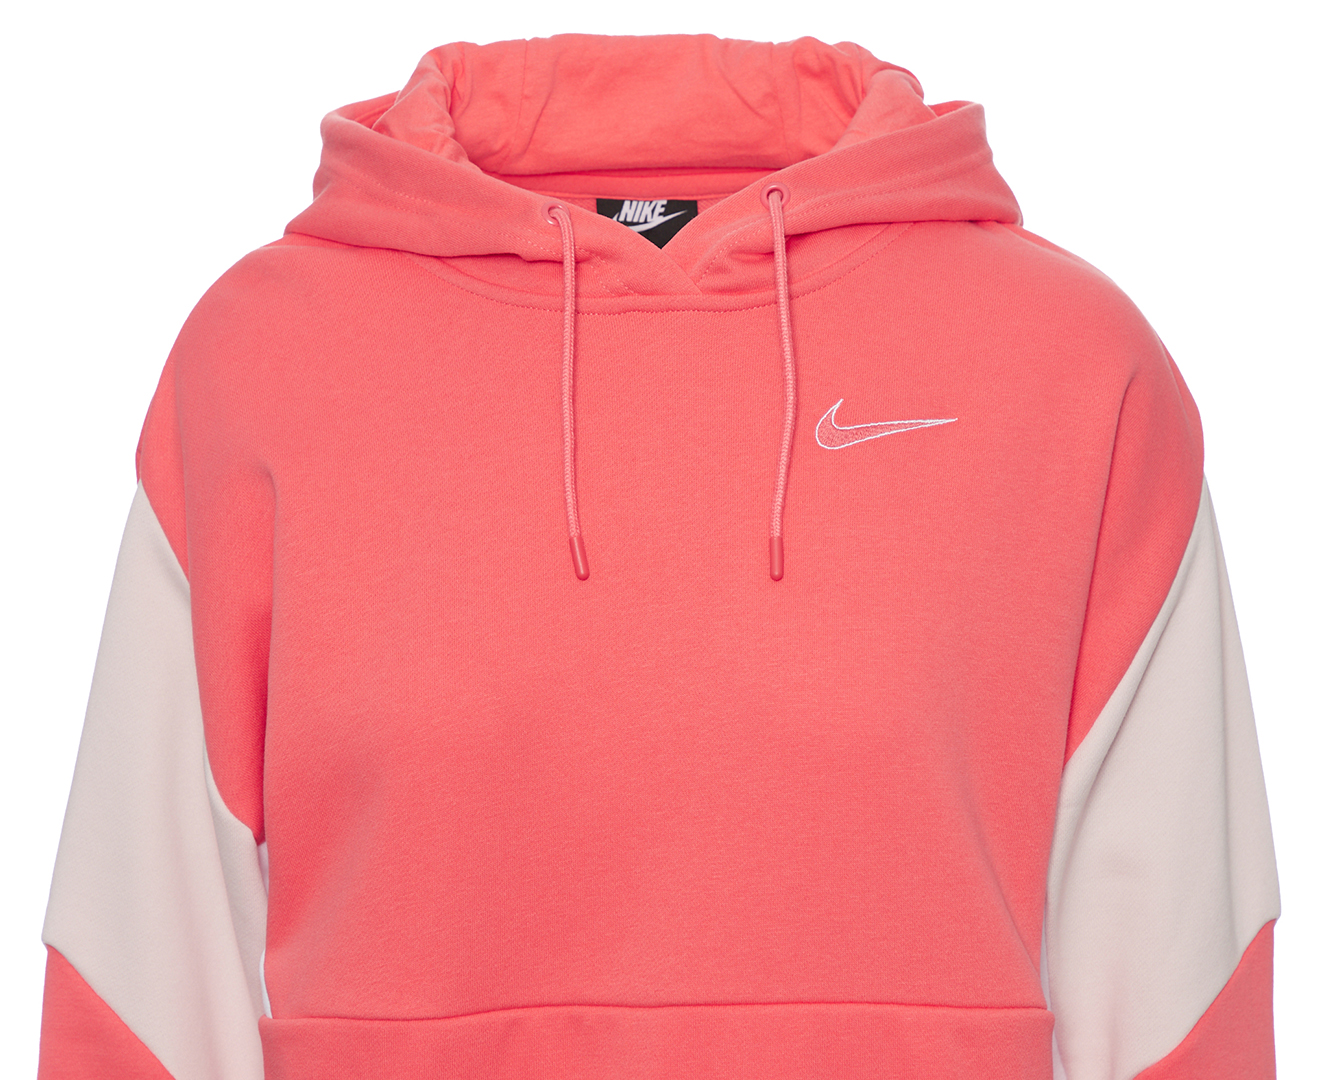 Nike Sportswear Women's French Terry Pullover Hoodie - Magic Ember ...